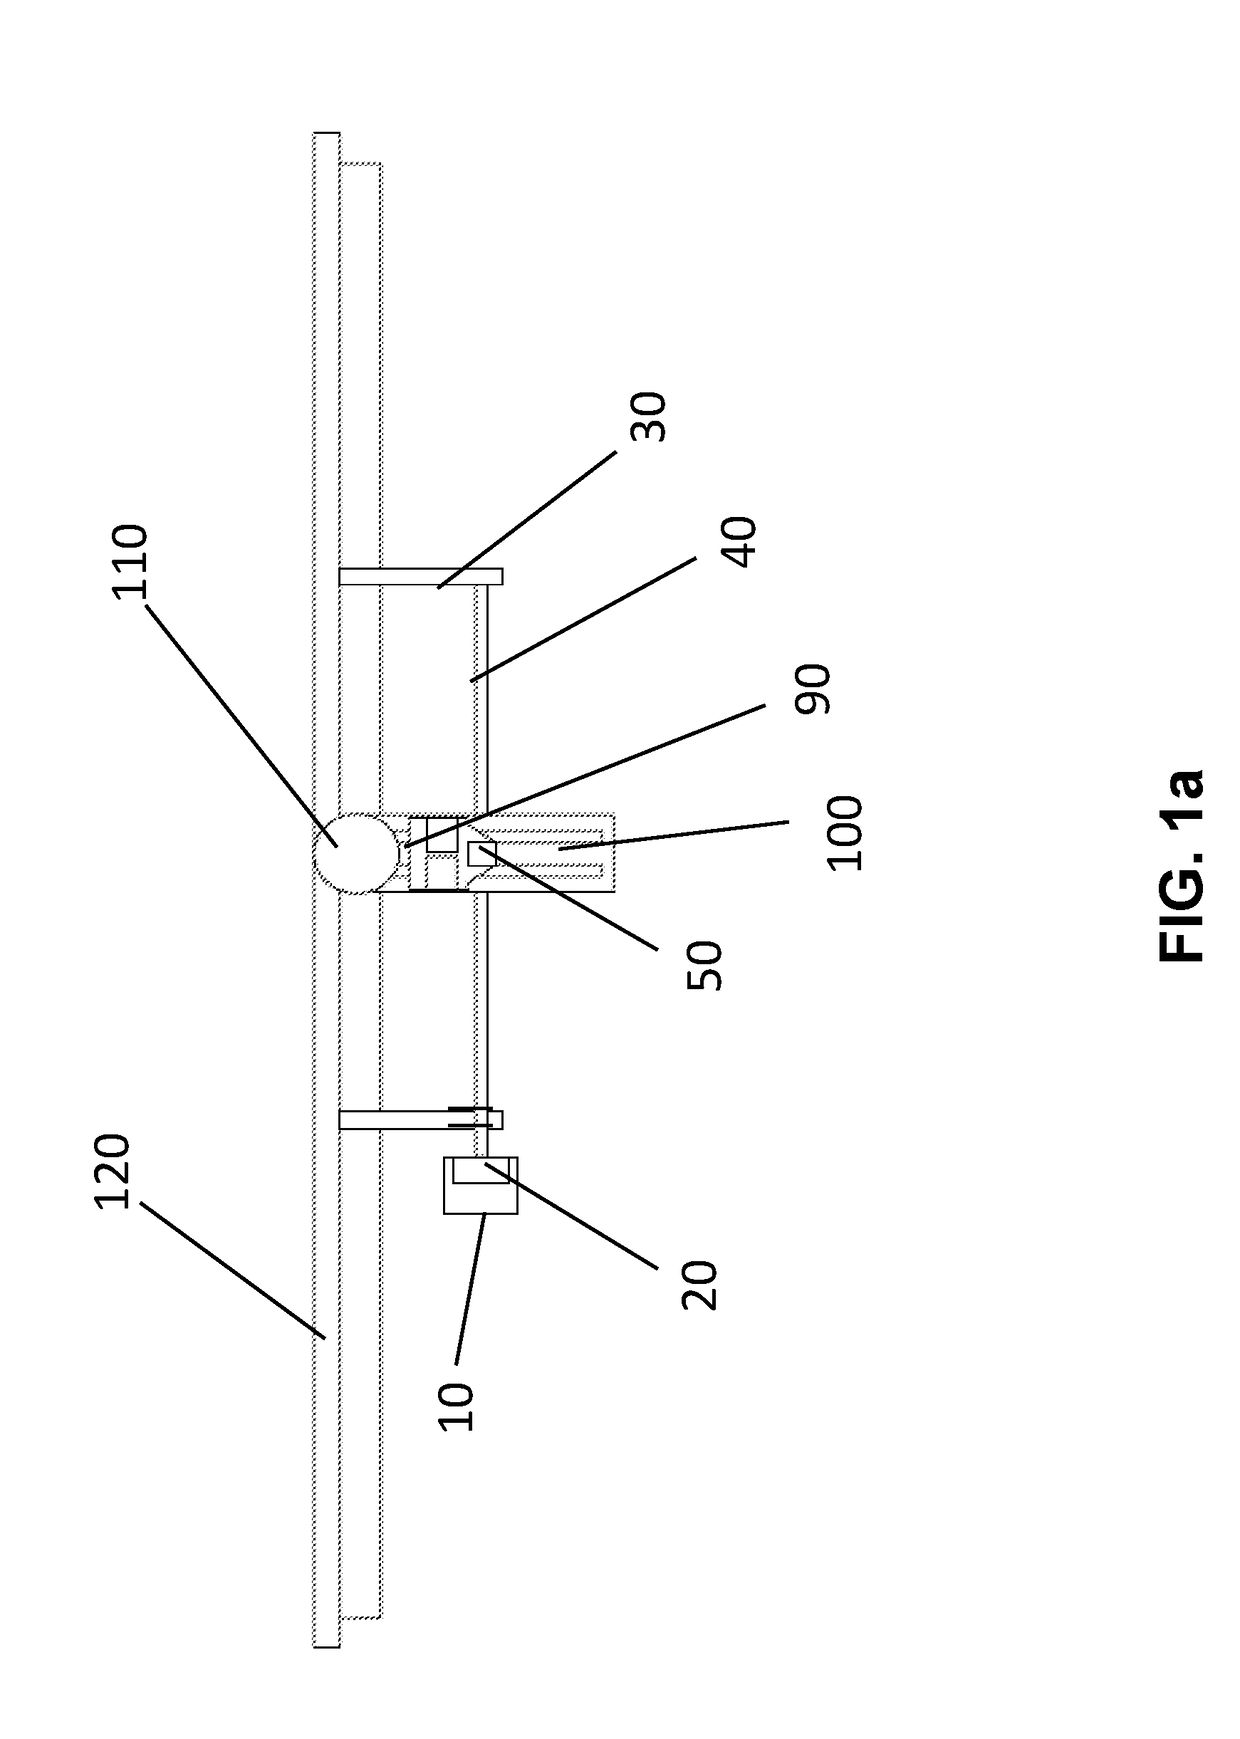 Movement control apparatus for heliostat device